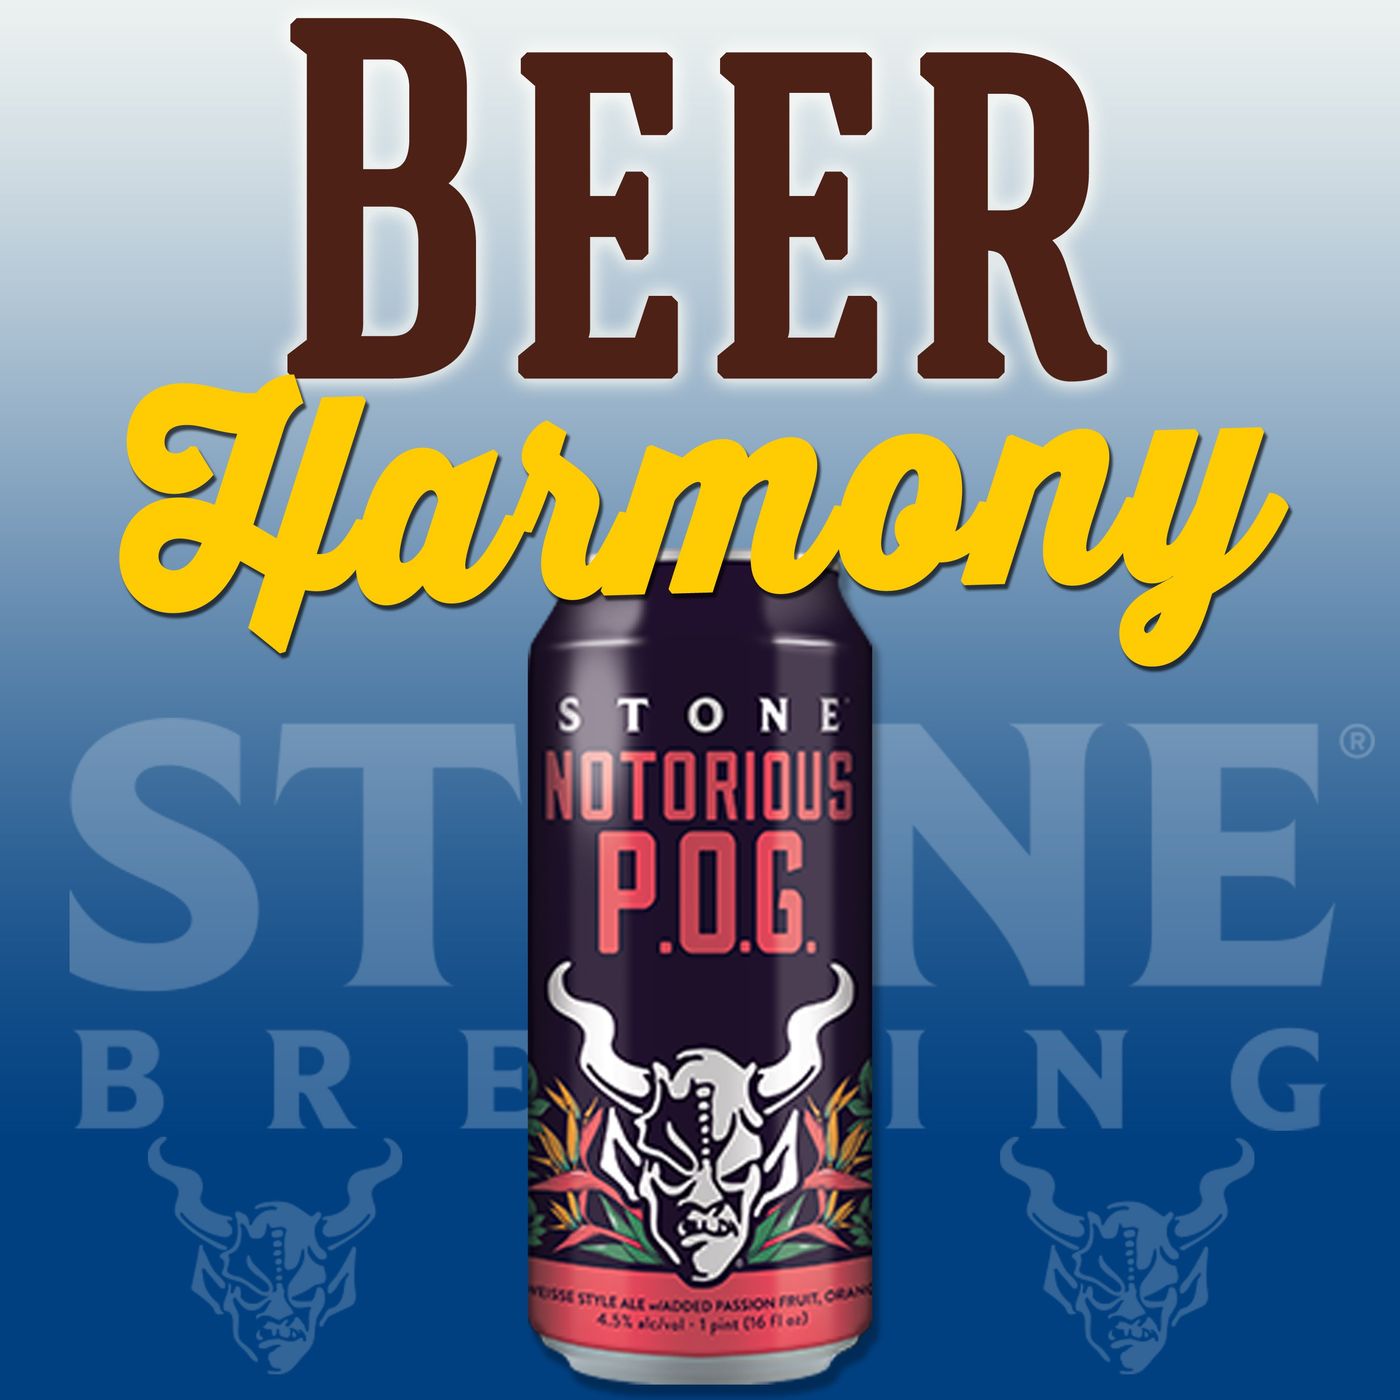 Stone Brewing Notorious P.O.G.